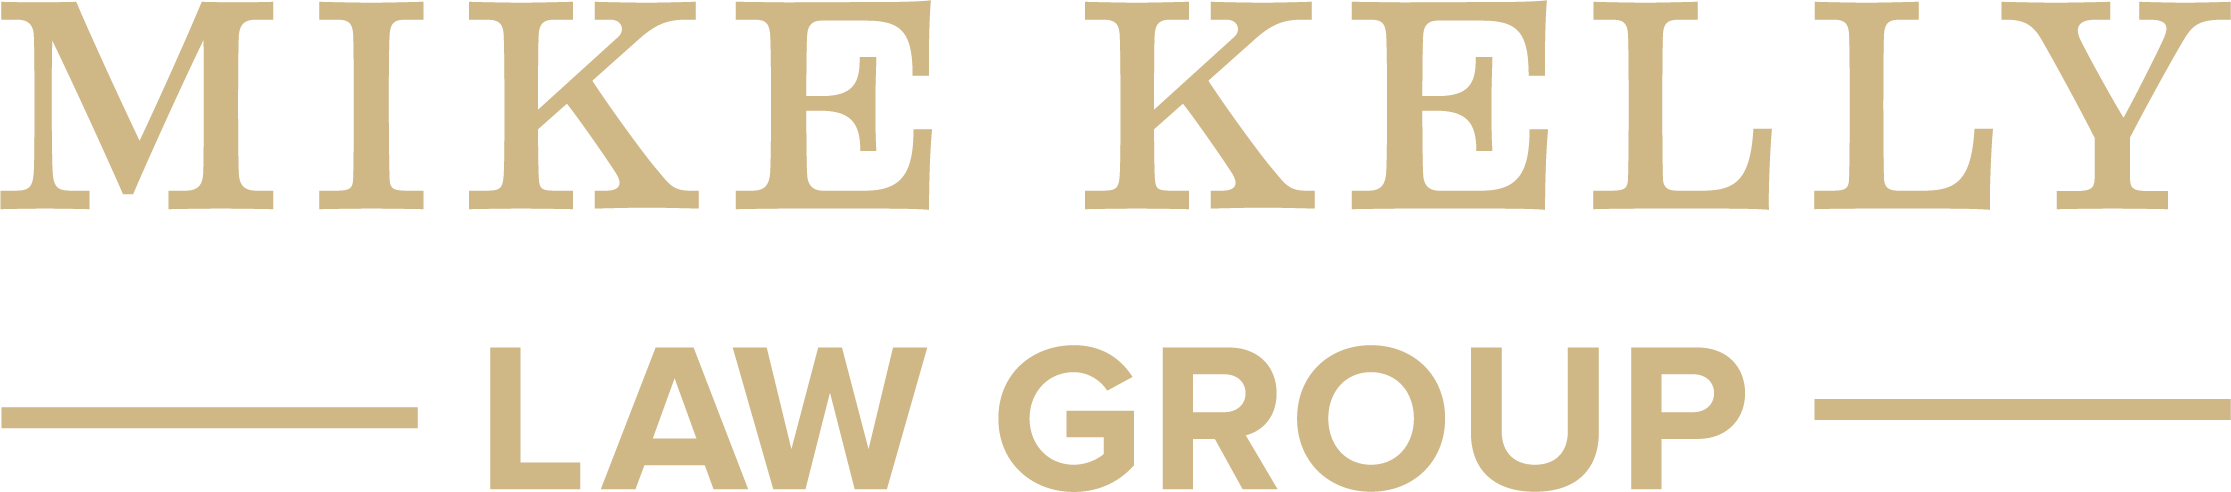 Mike Kelly Law Group